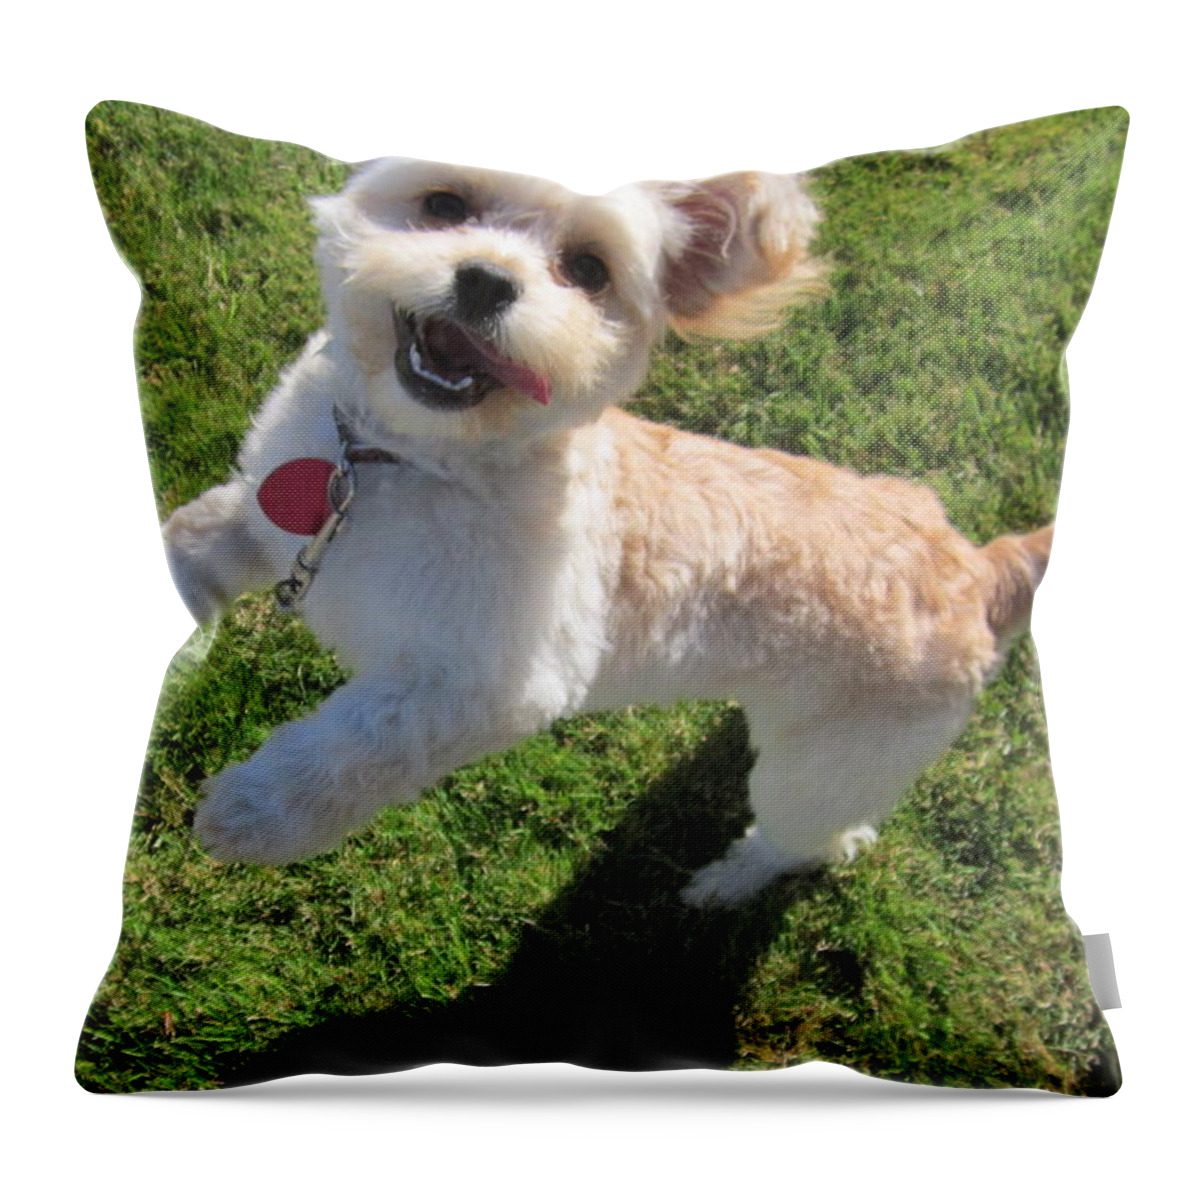 Happy Throw Pillow featuring the photograph Happy by Kazumi Whitemoon